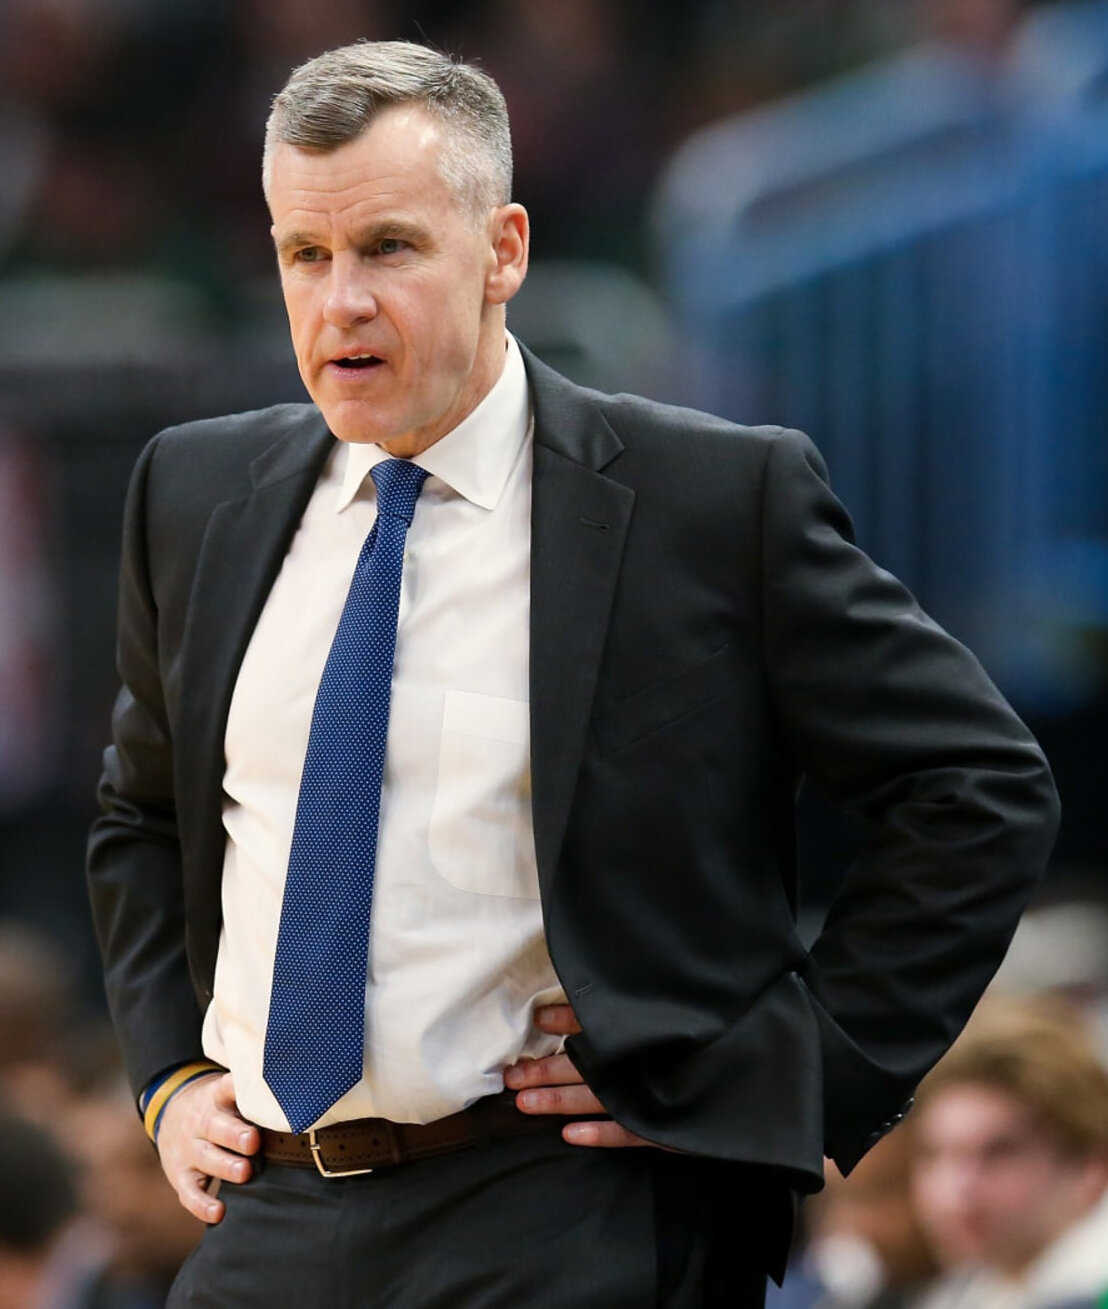 Rockville Centre’s Billy Donovan starred as a basketball player at St. Agnes and Providence College, as well as a coach on the collegiate and pro levels.